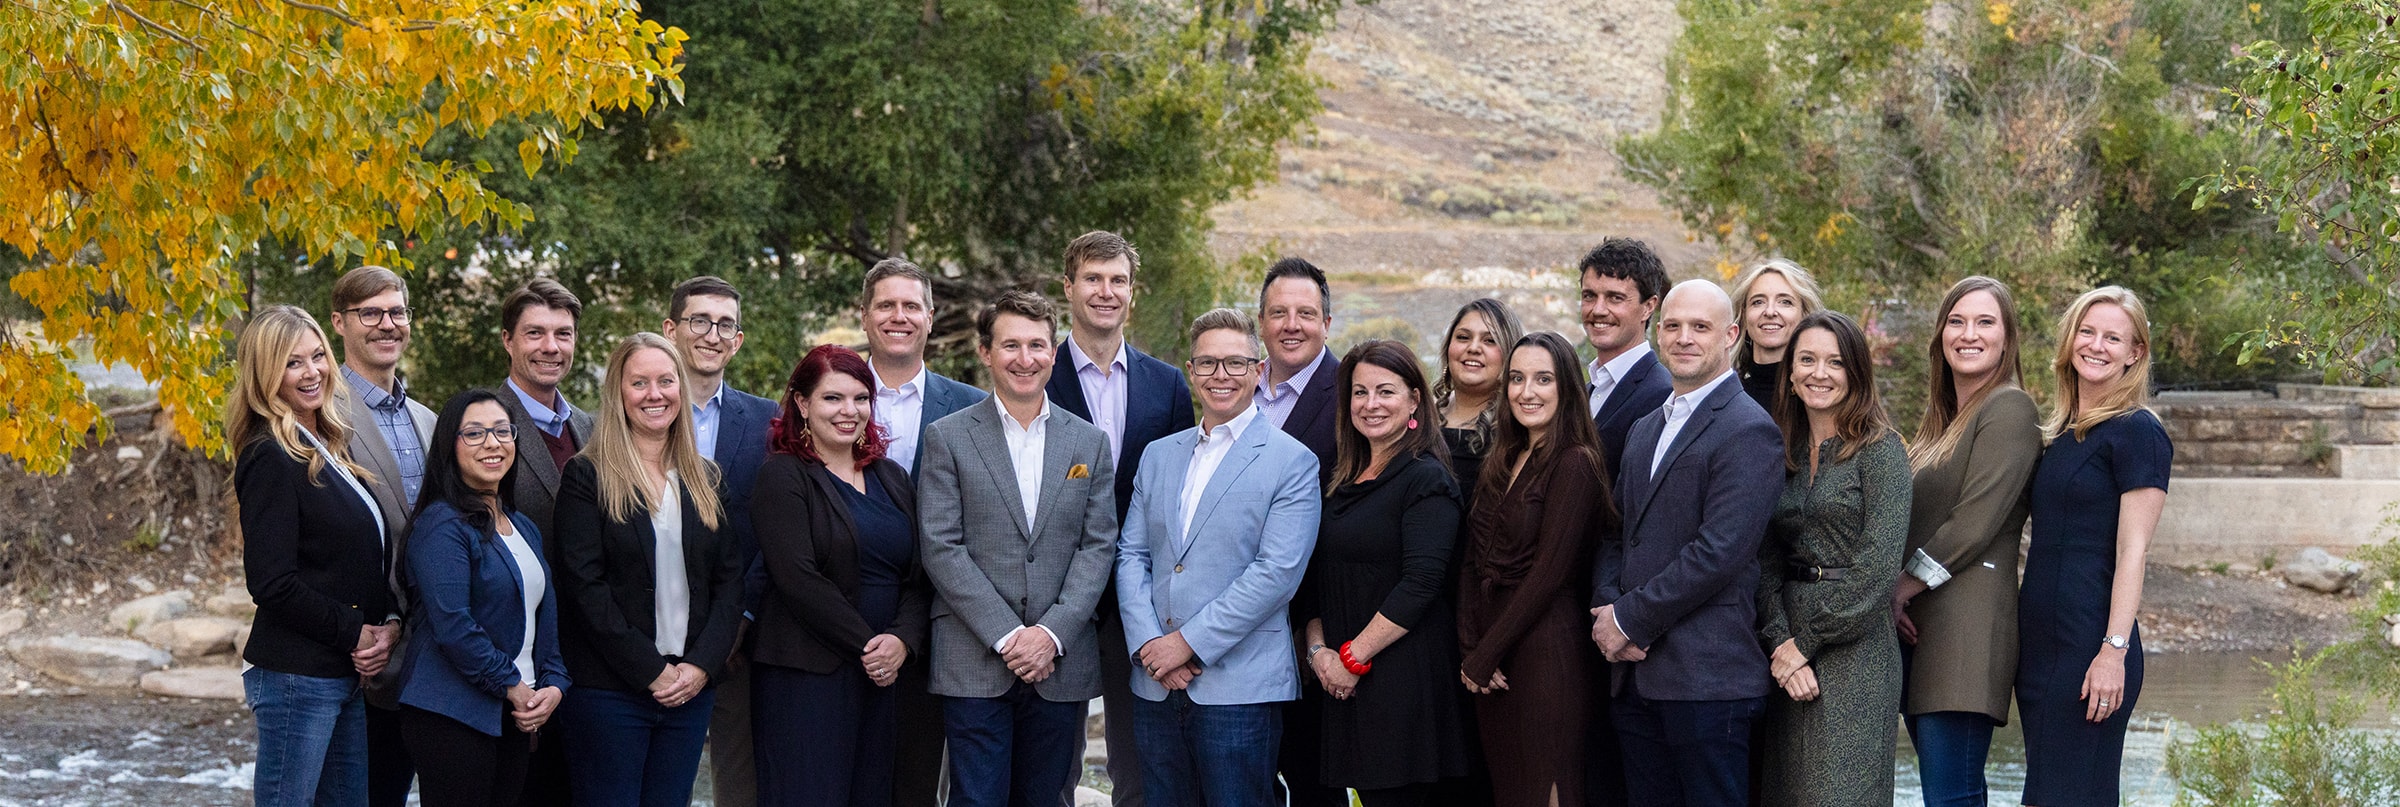 JVAM Colorado Mountain Law Firm and Attorneys and Staff Team Photo